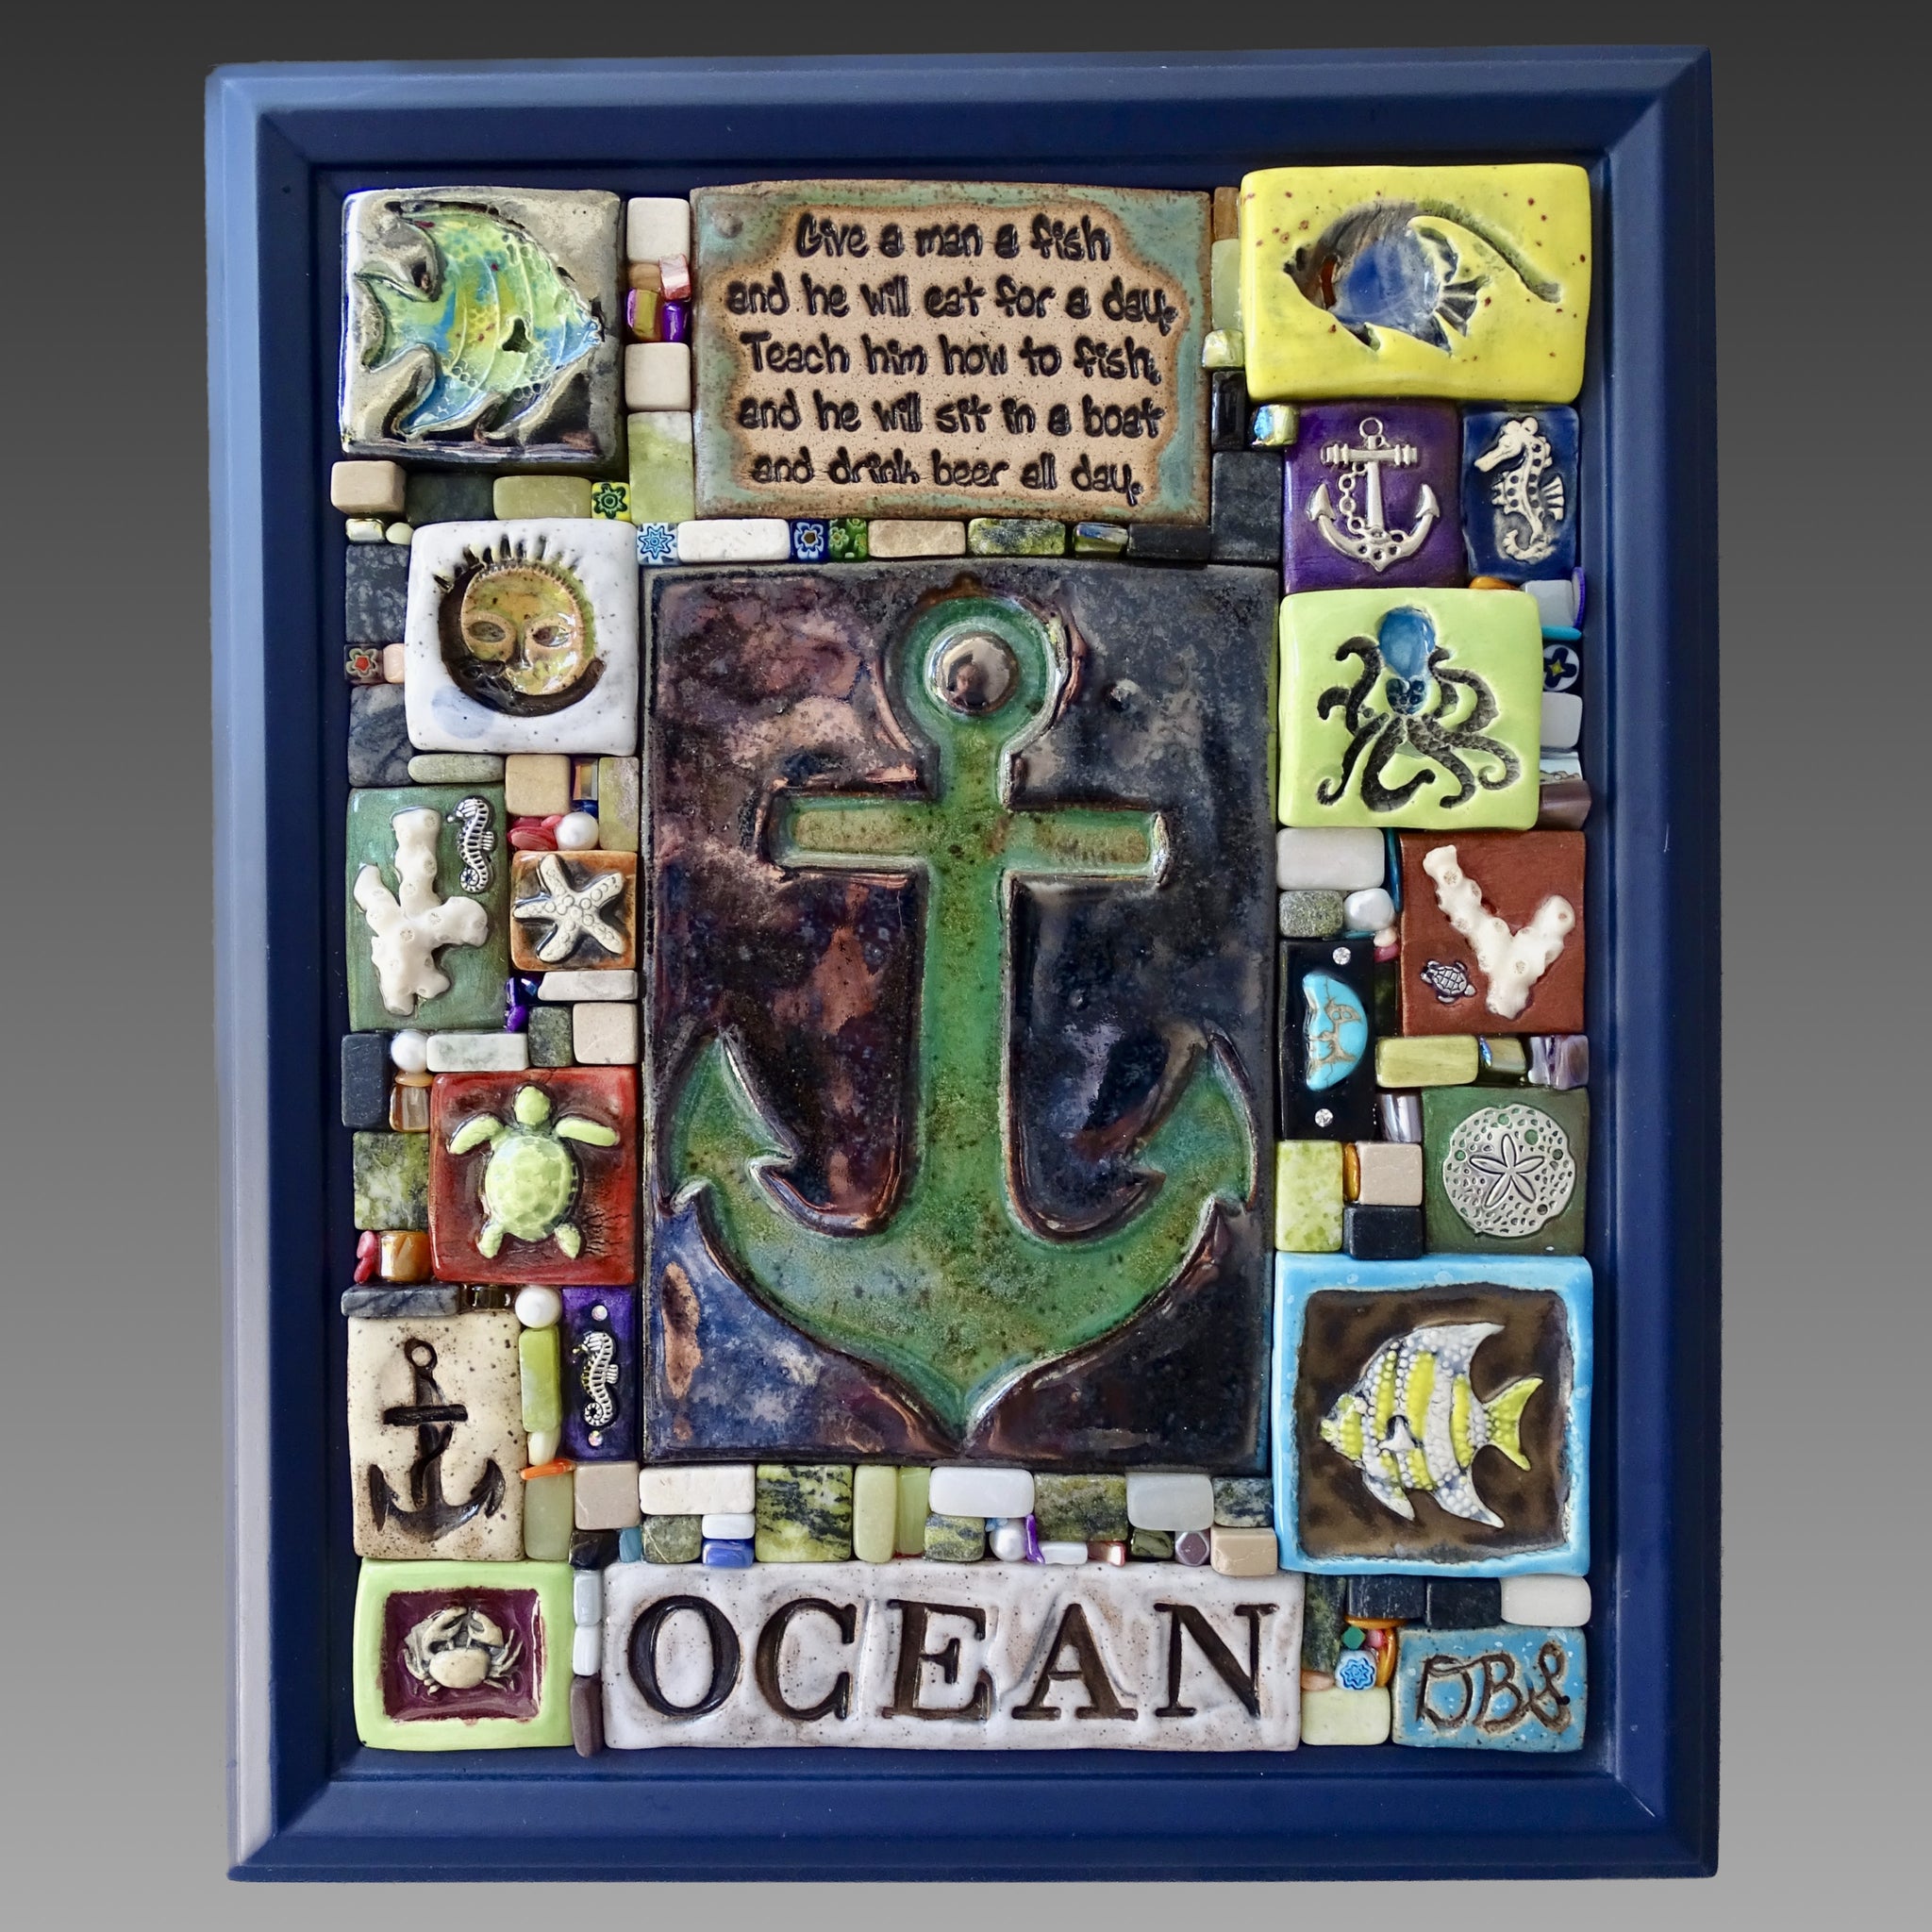 Clay mosaic artwork with nautical theme. Ocean art, unique decor or gift idea for ocean themed room. Fish, anchor, coral, octopus, sea turtle, seahorse, starfish. "Give a man a fish"